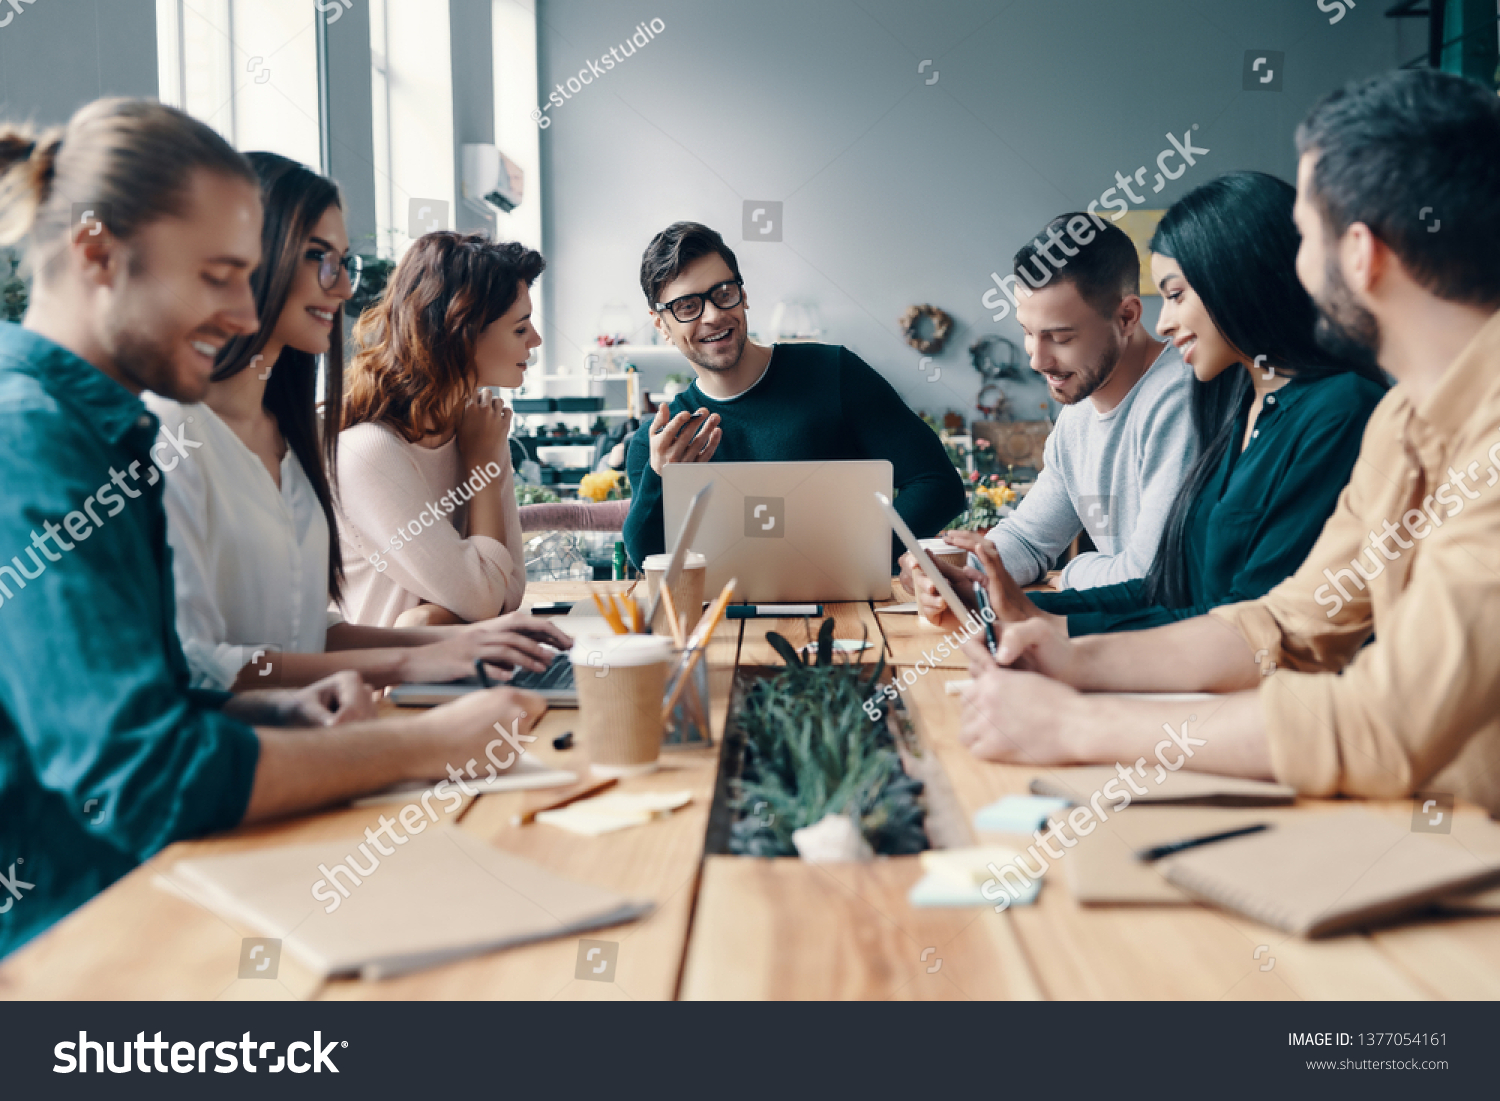 Marketing team. Group of young modern people in smart casual wear discussing something while working in the creative office               #1377054161